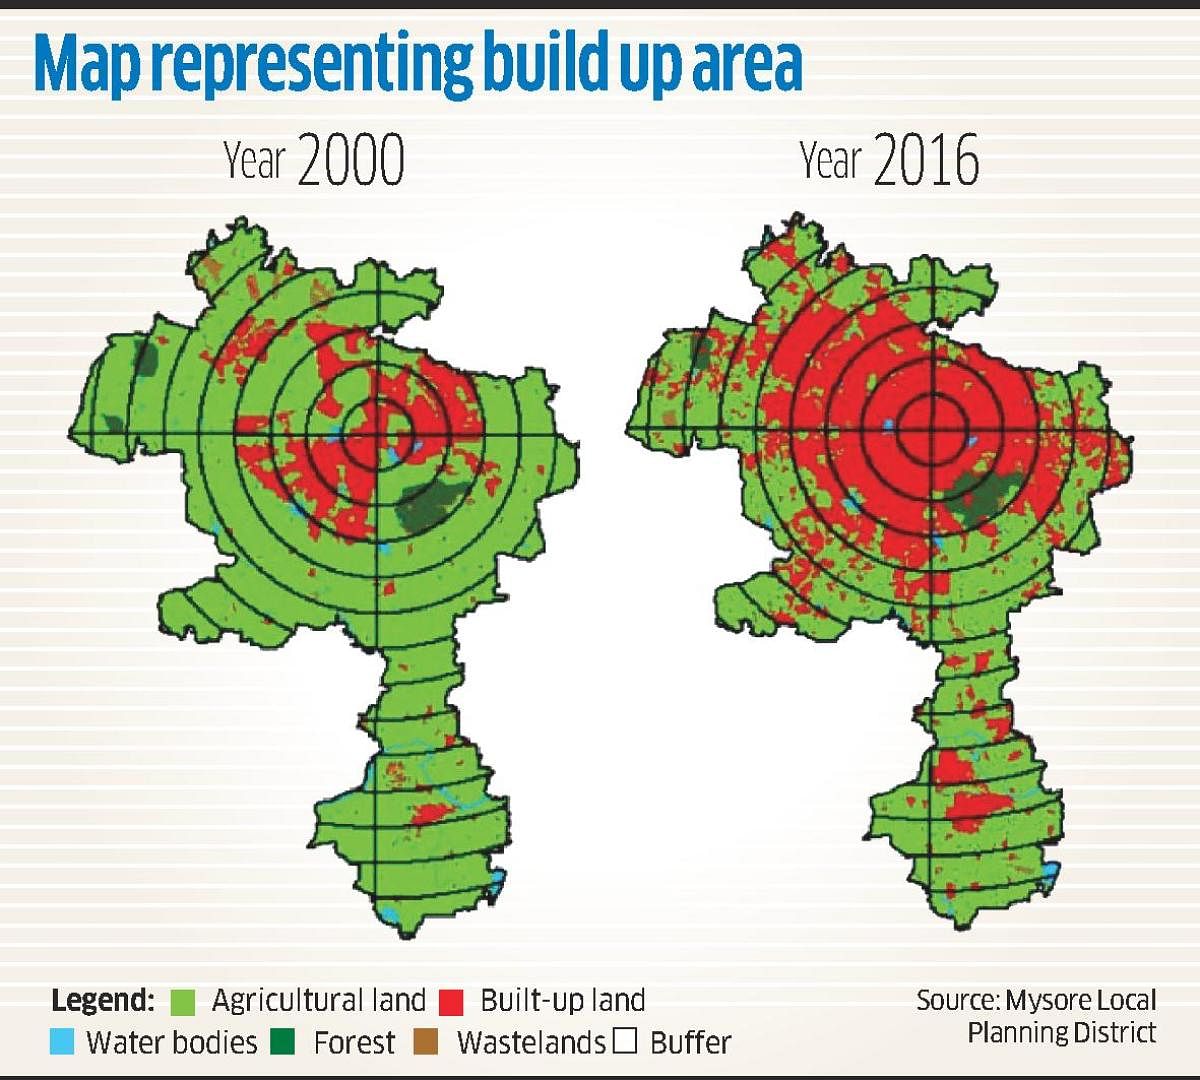 Map representing the built-up area in Mysuru Local Planning District in 2000 and 2016.